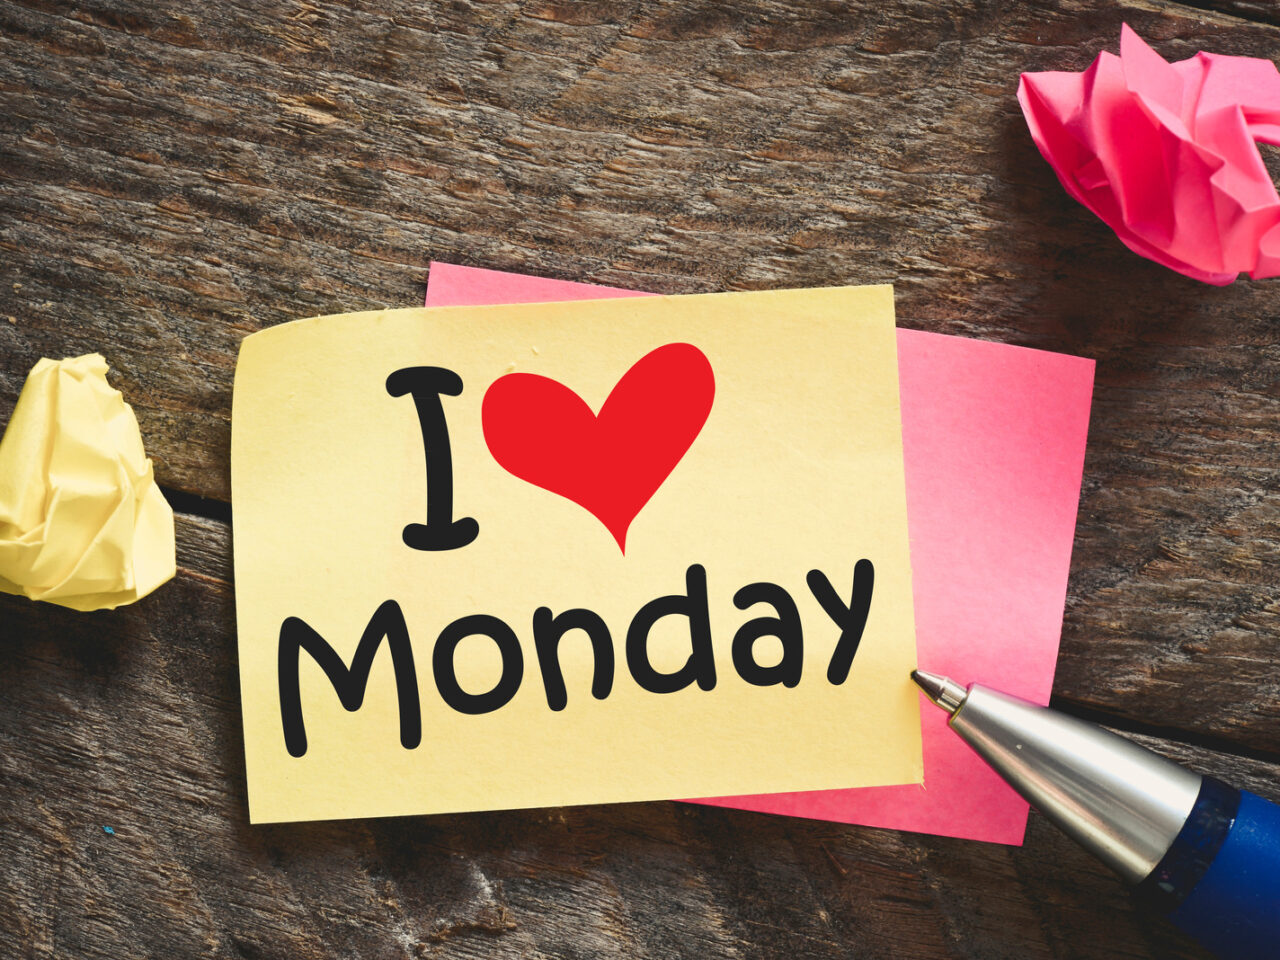 Note with I love Monday and red heart on the wooden background with pen